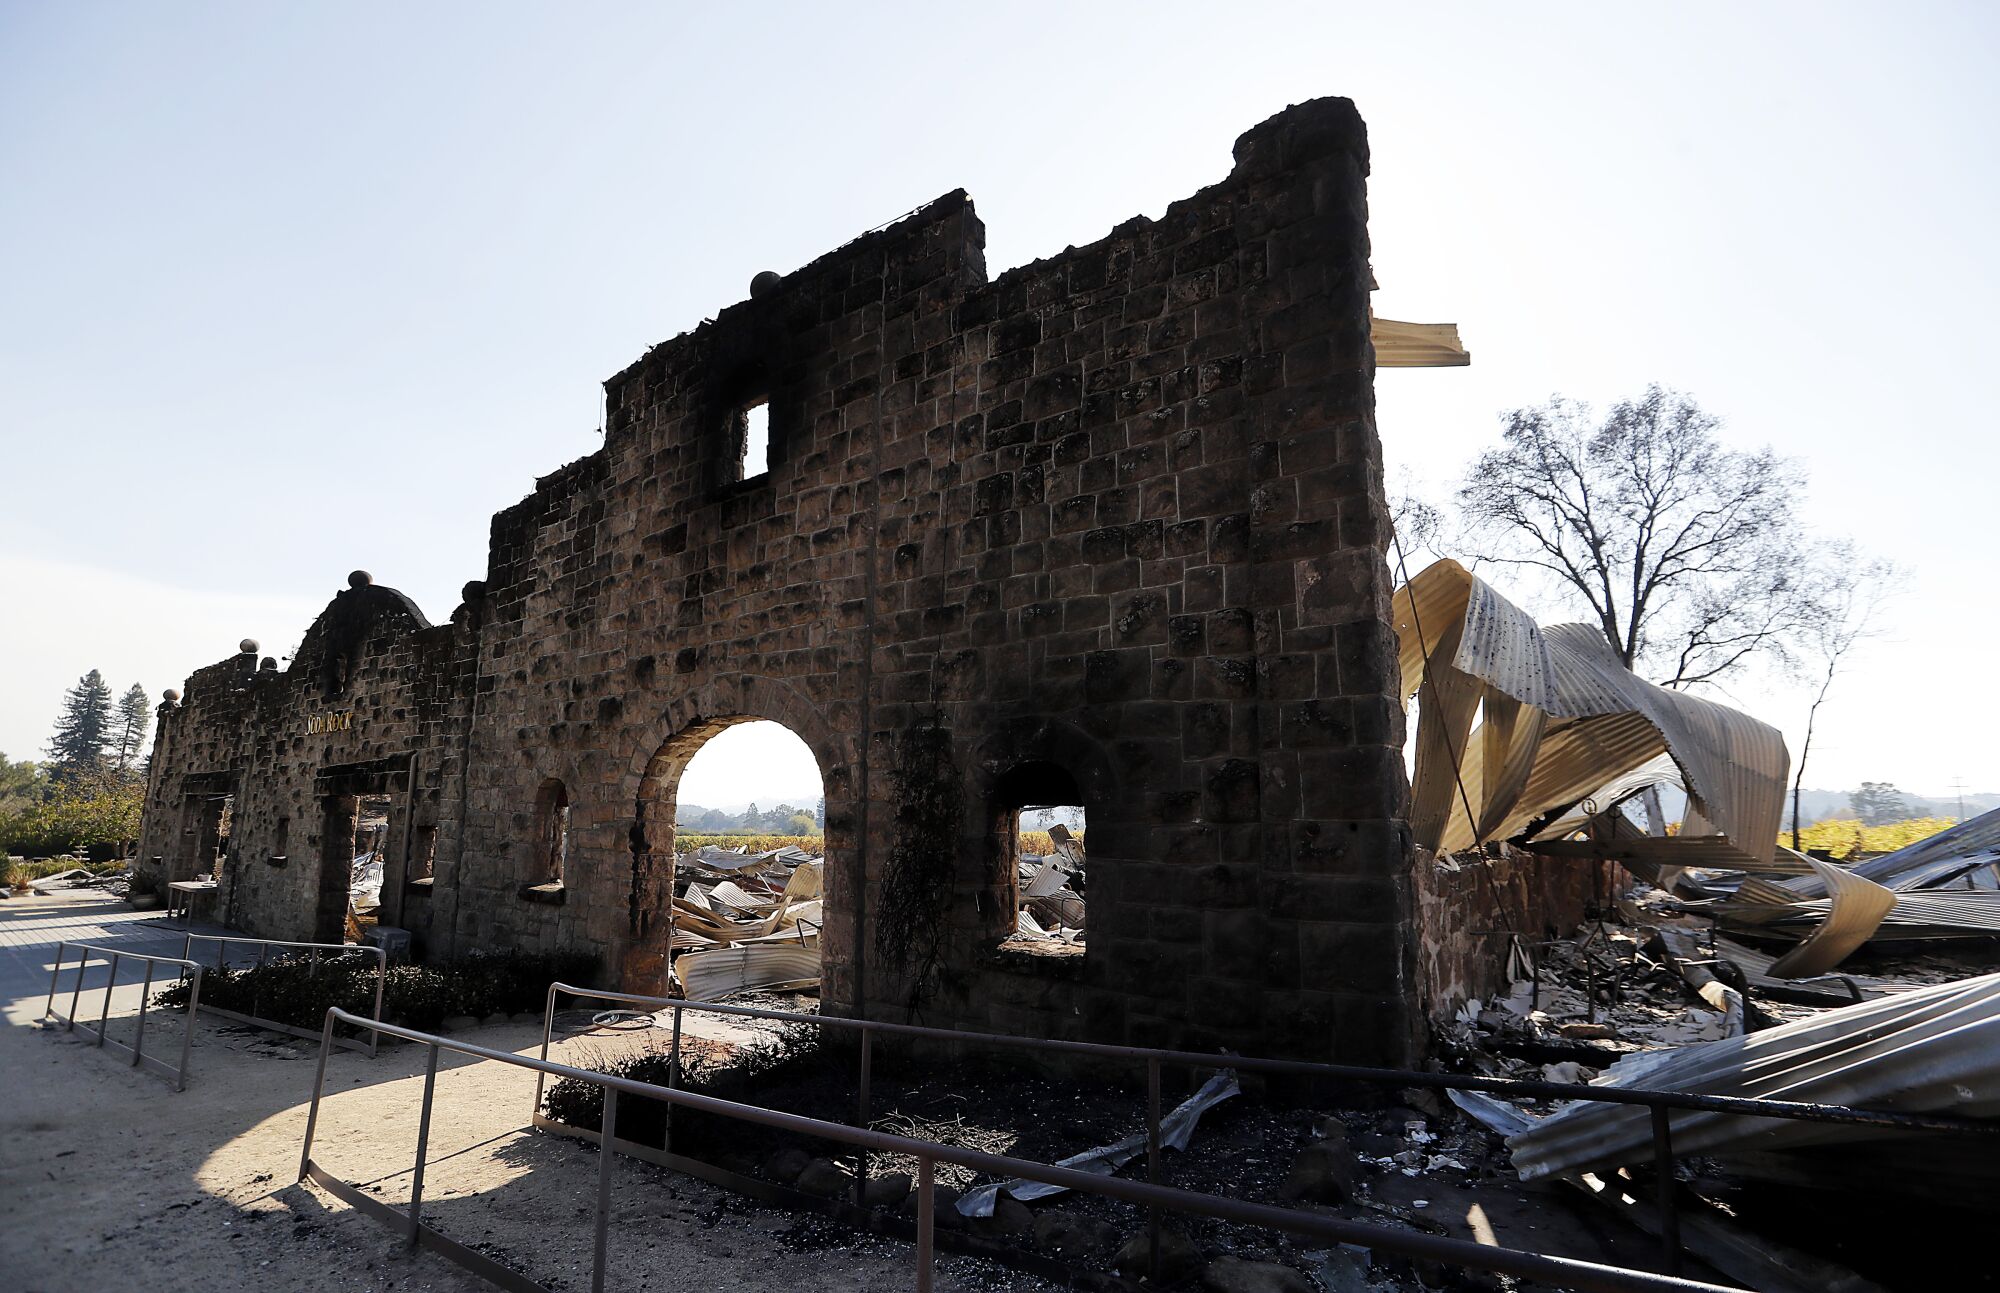 A stone facade is all that remains standing at the Soda Rock Winery, which was destroyed by the Kincade fire.